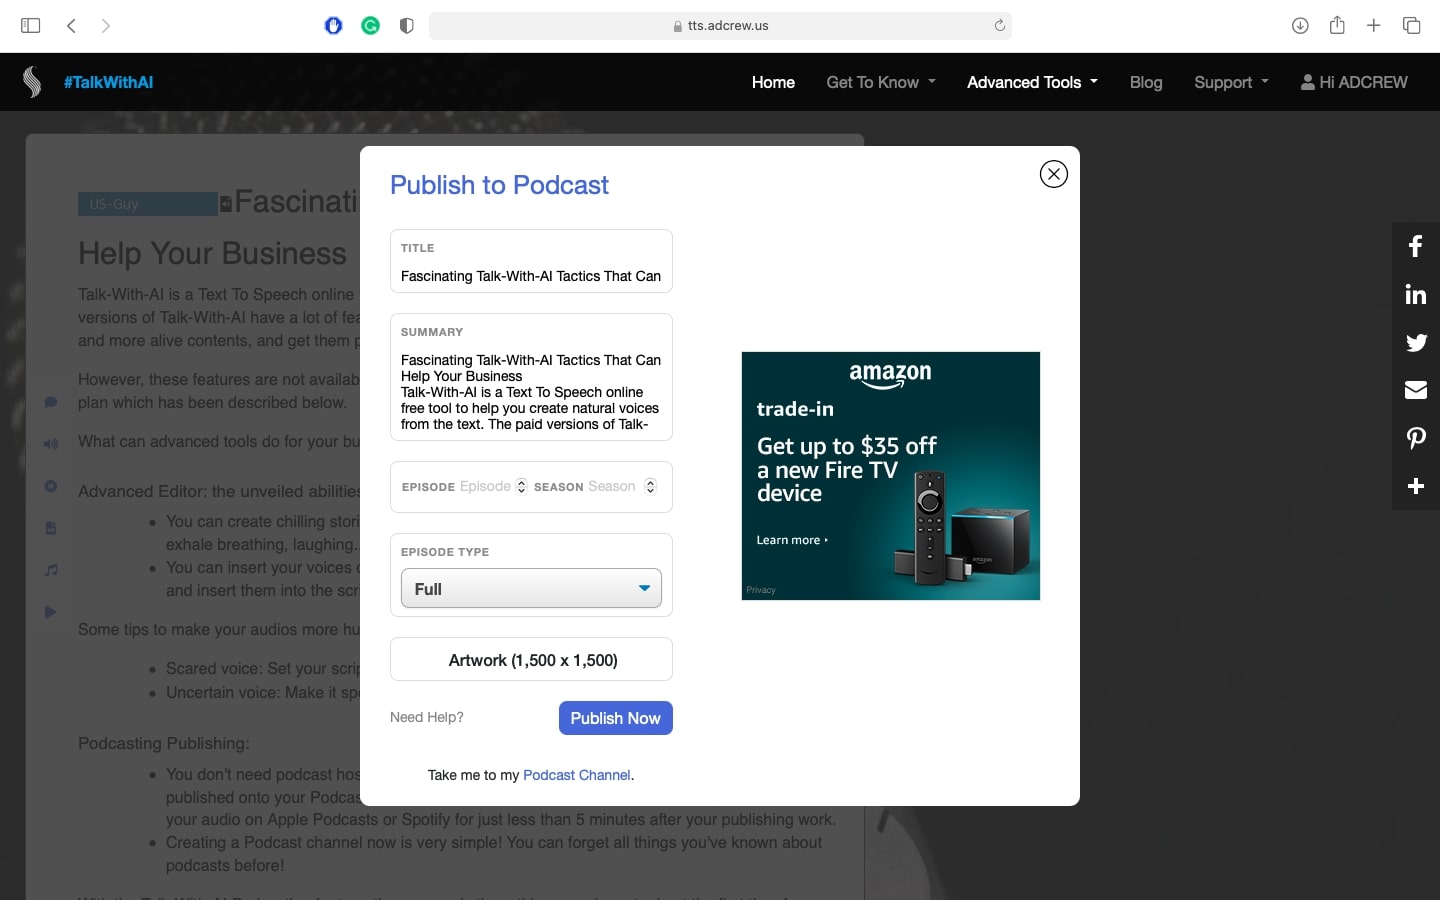 Publish to Your Podcast Channel